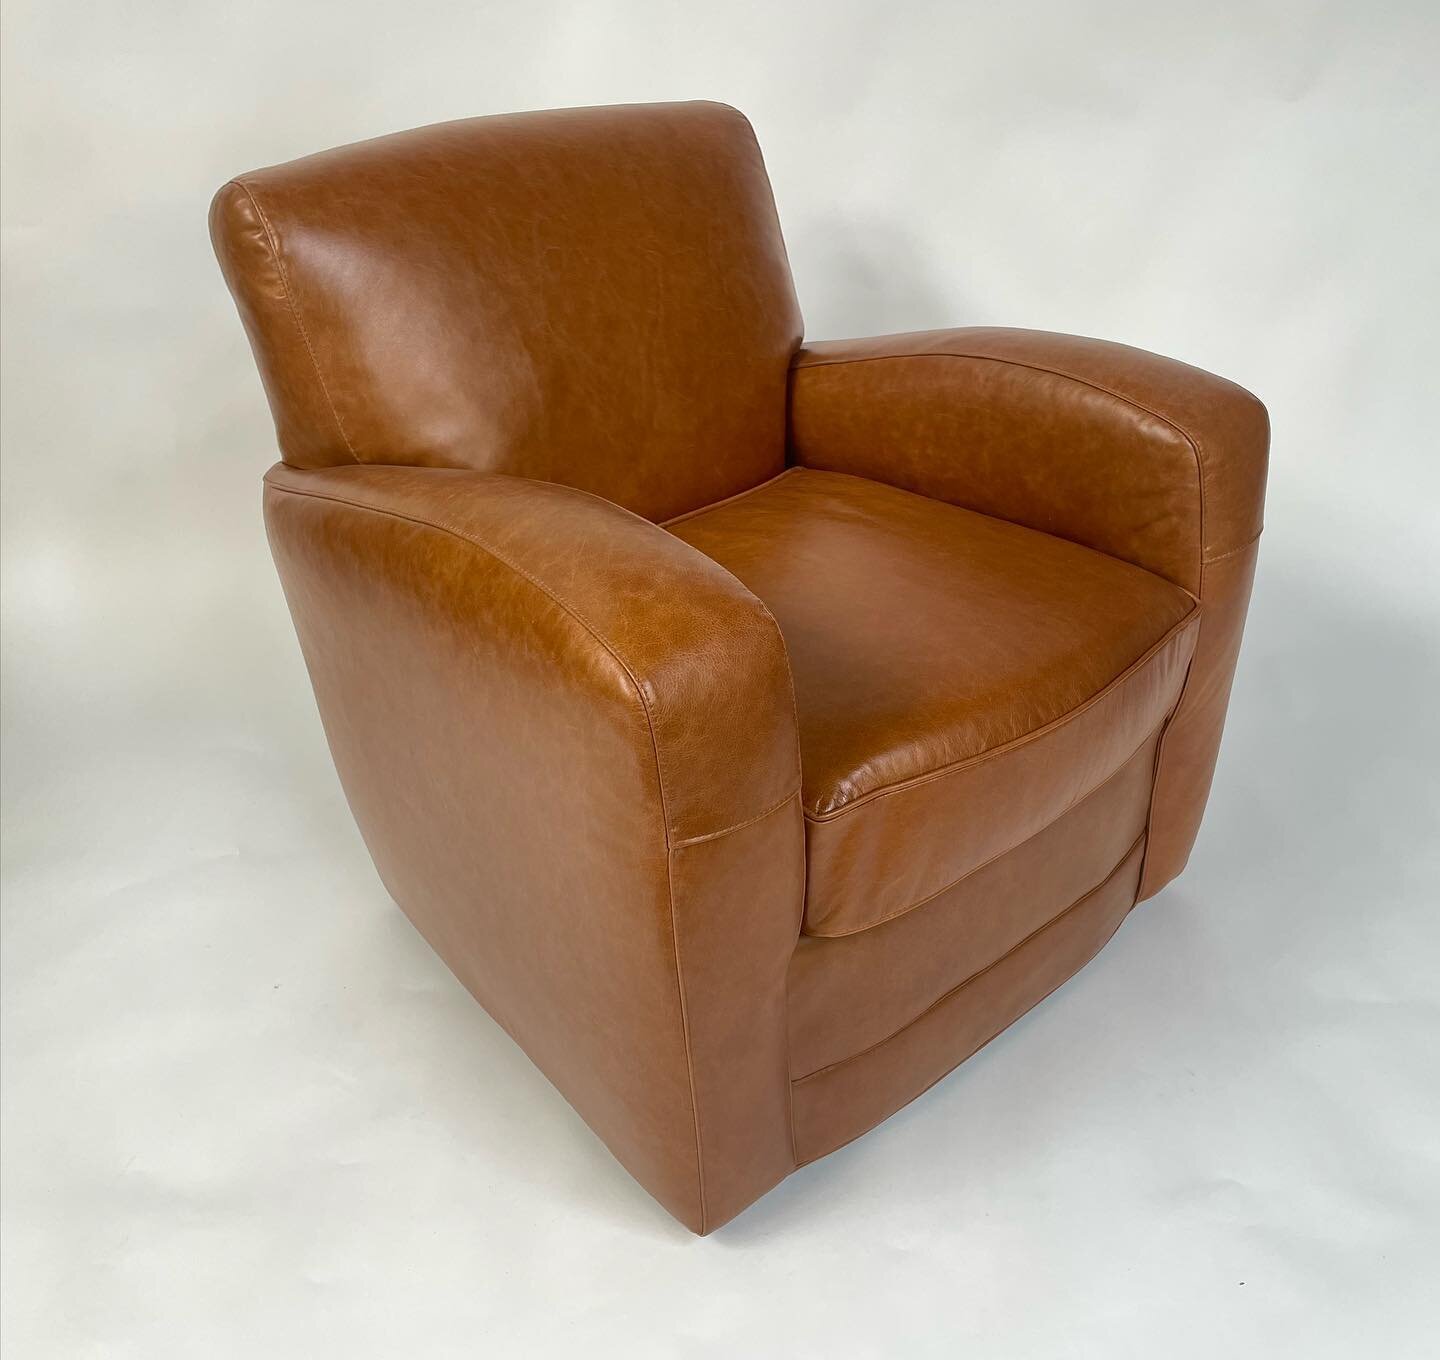 Here we have a Mitchell Gold + Bob Williams club chair part a two piece set that our team re upholstered in a nice reddish brown lightly distressed leather. 

#houstonleatherrepair #texasleatherupholstery#leather #leatherfurniture #leatherclubchair #